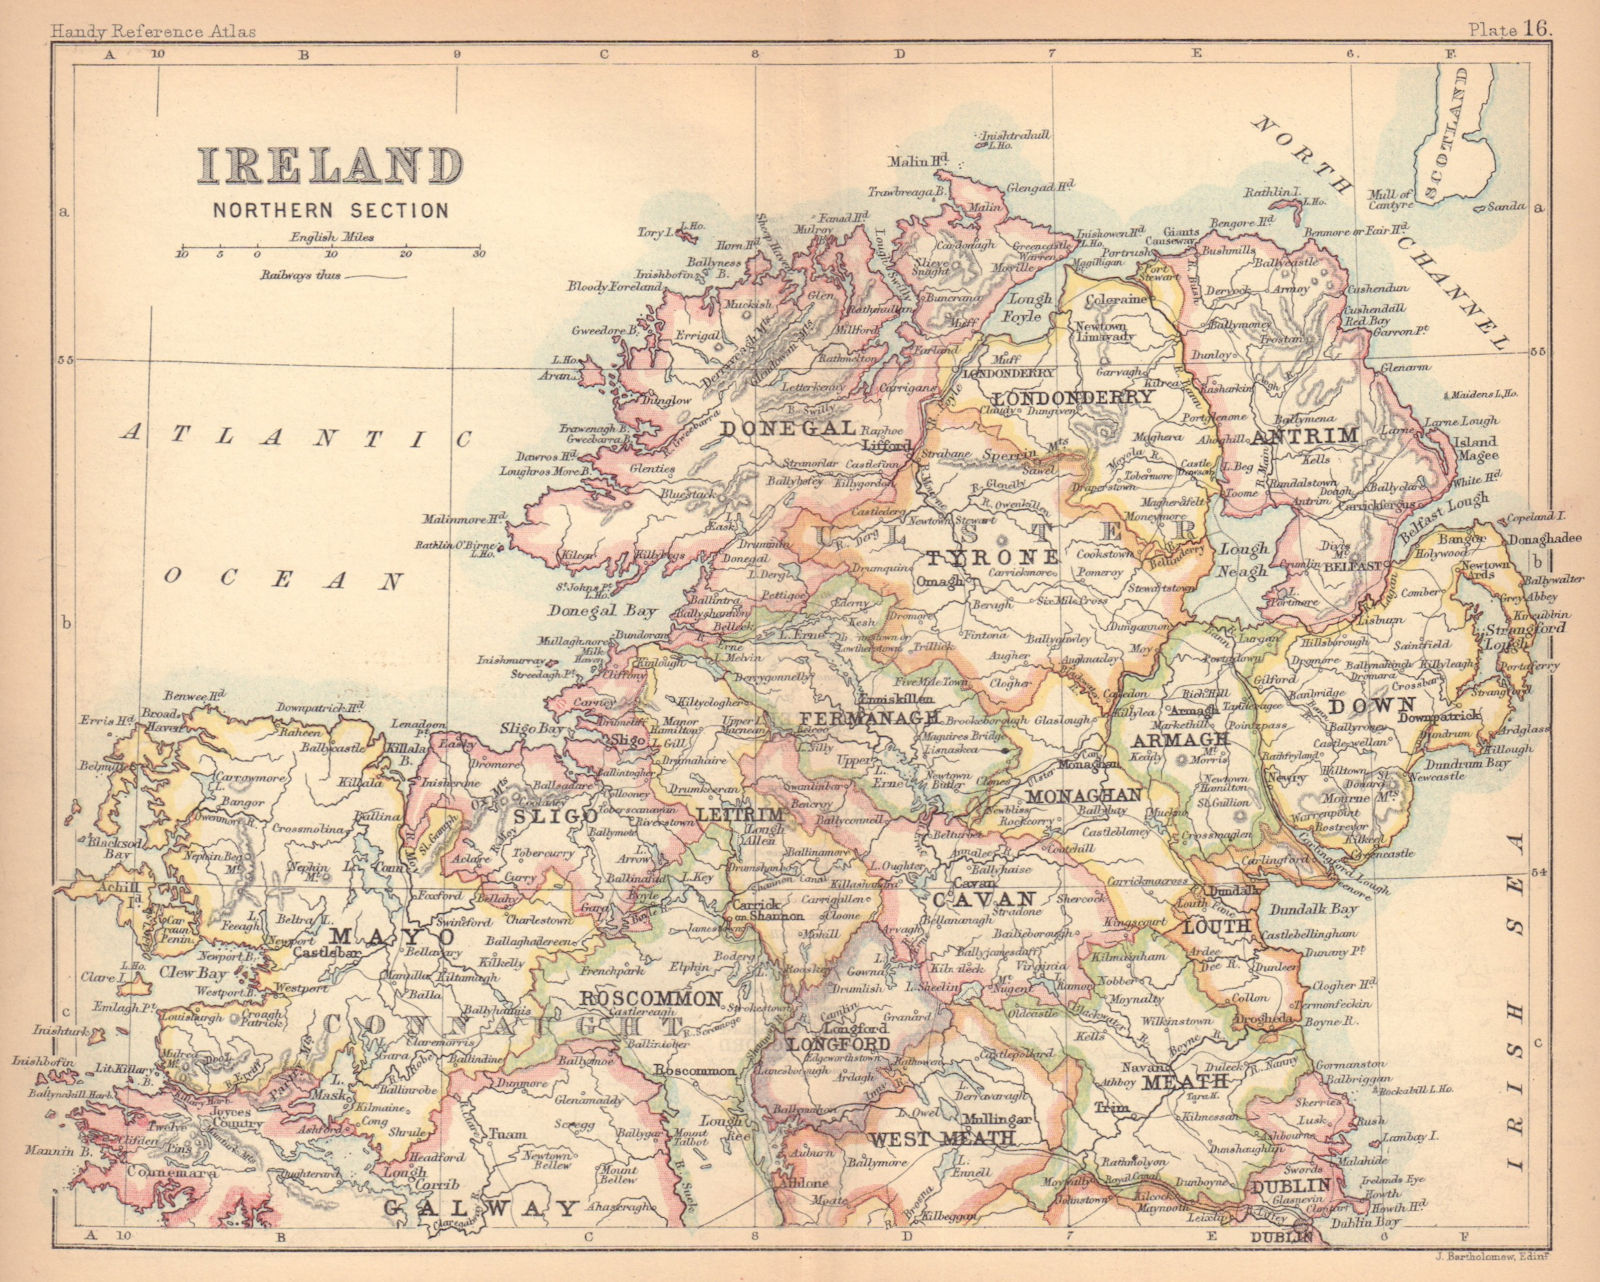 Associate Product Ireland, Northern Section. Ulster. BARTHOLOMEW 1888 old antique map plan chart